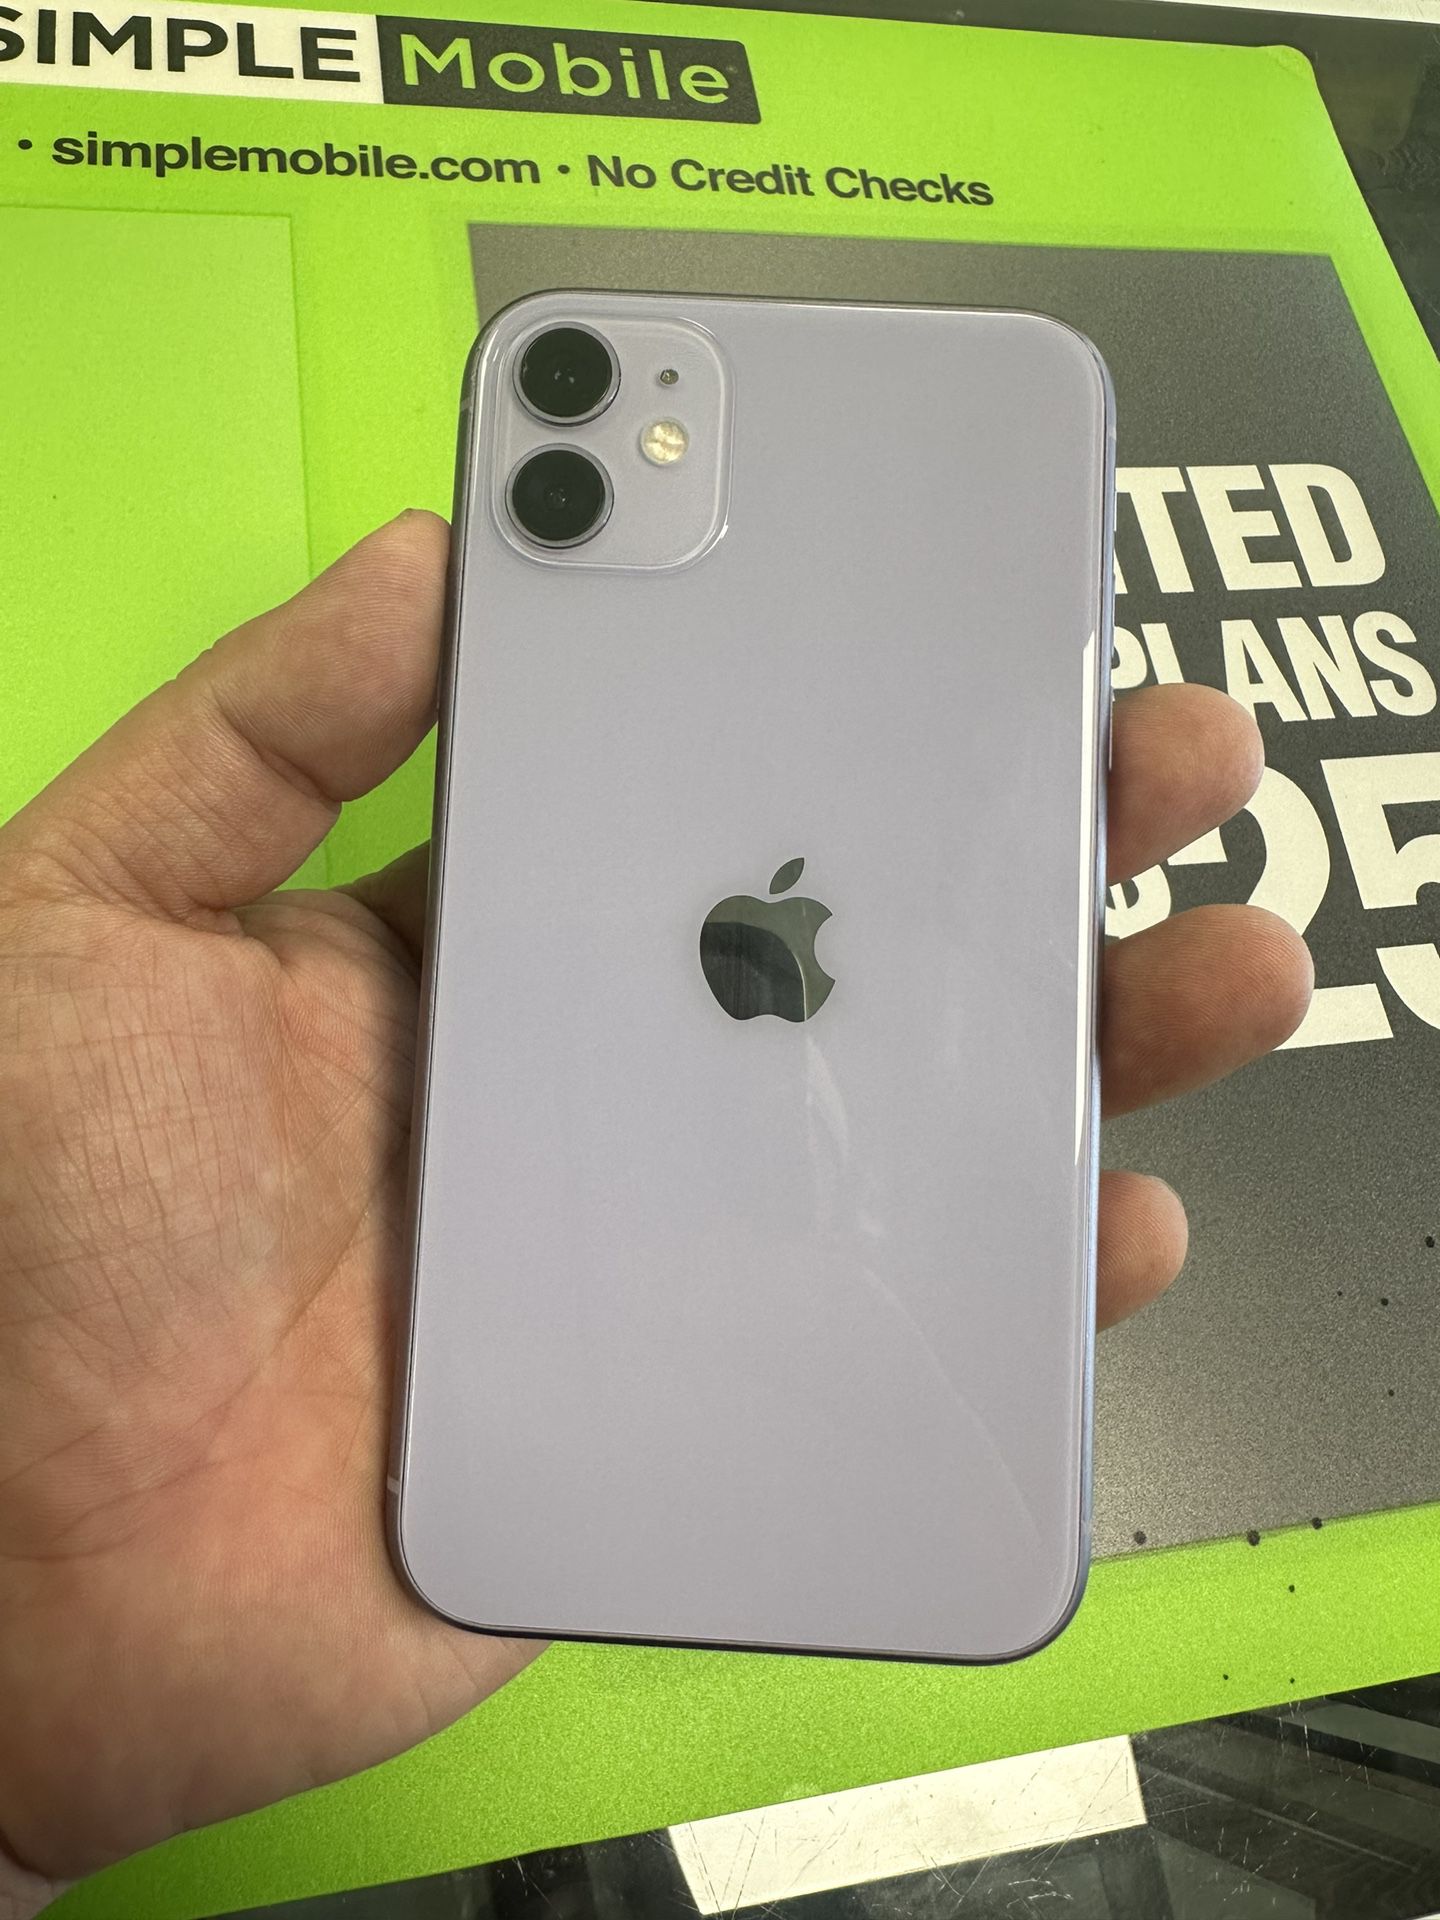 iPhone 11 64GB T-Mobile, MetroPCS, Simple Mobile Only 